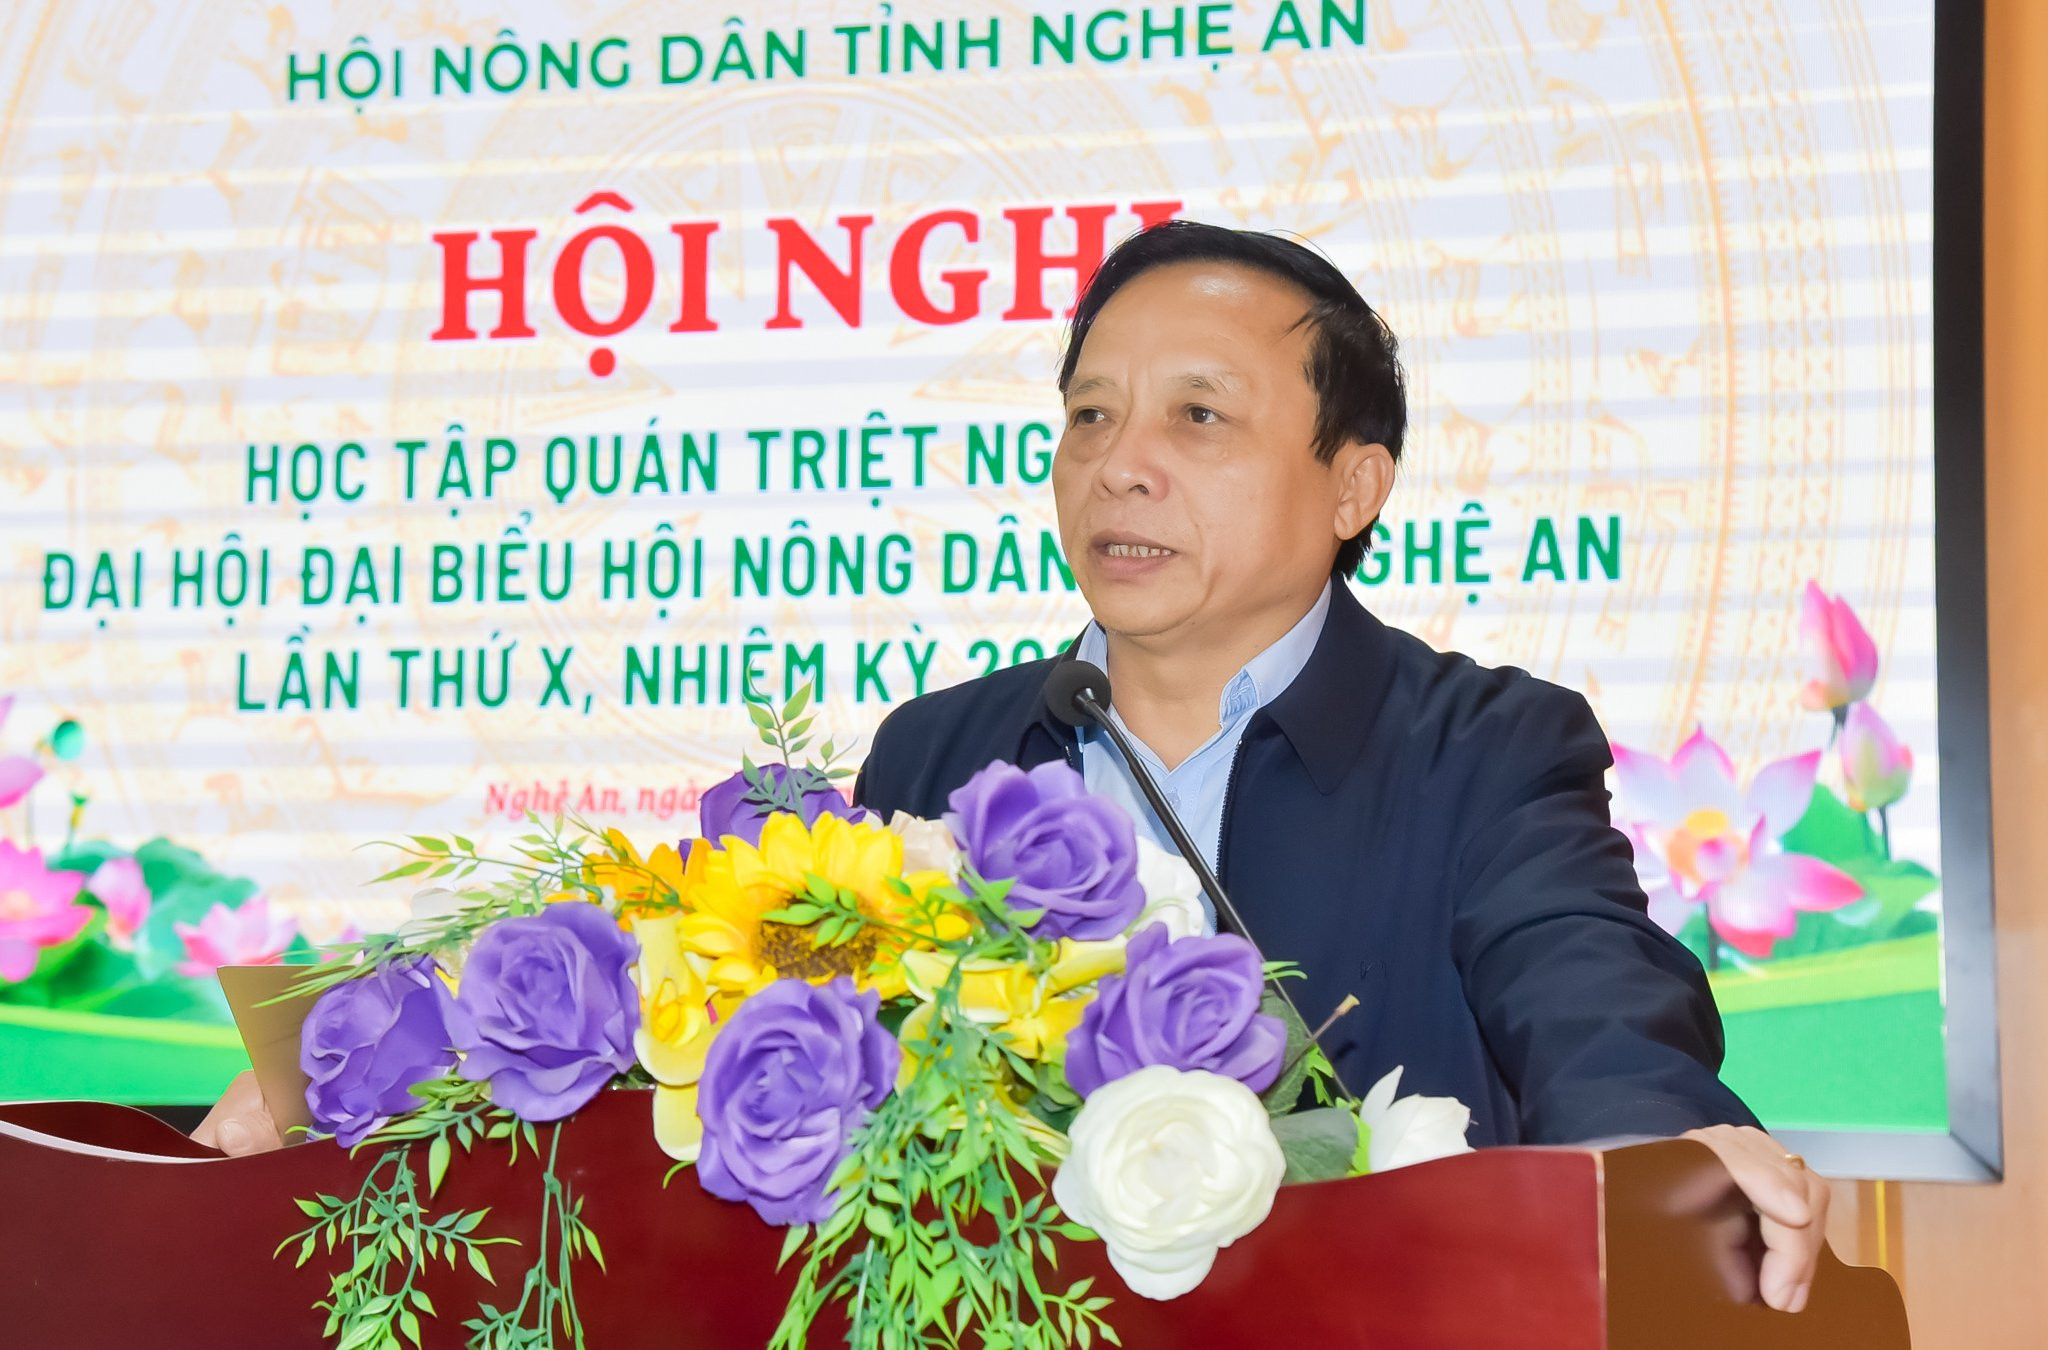 bna-a-tung-anh-thanh-le-7353.jpg